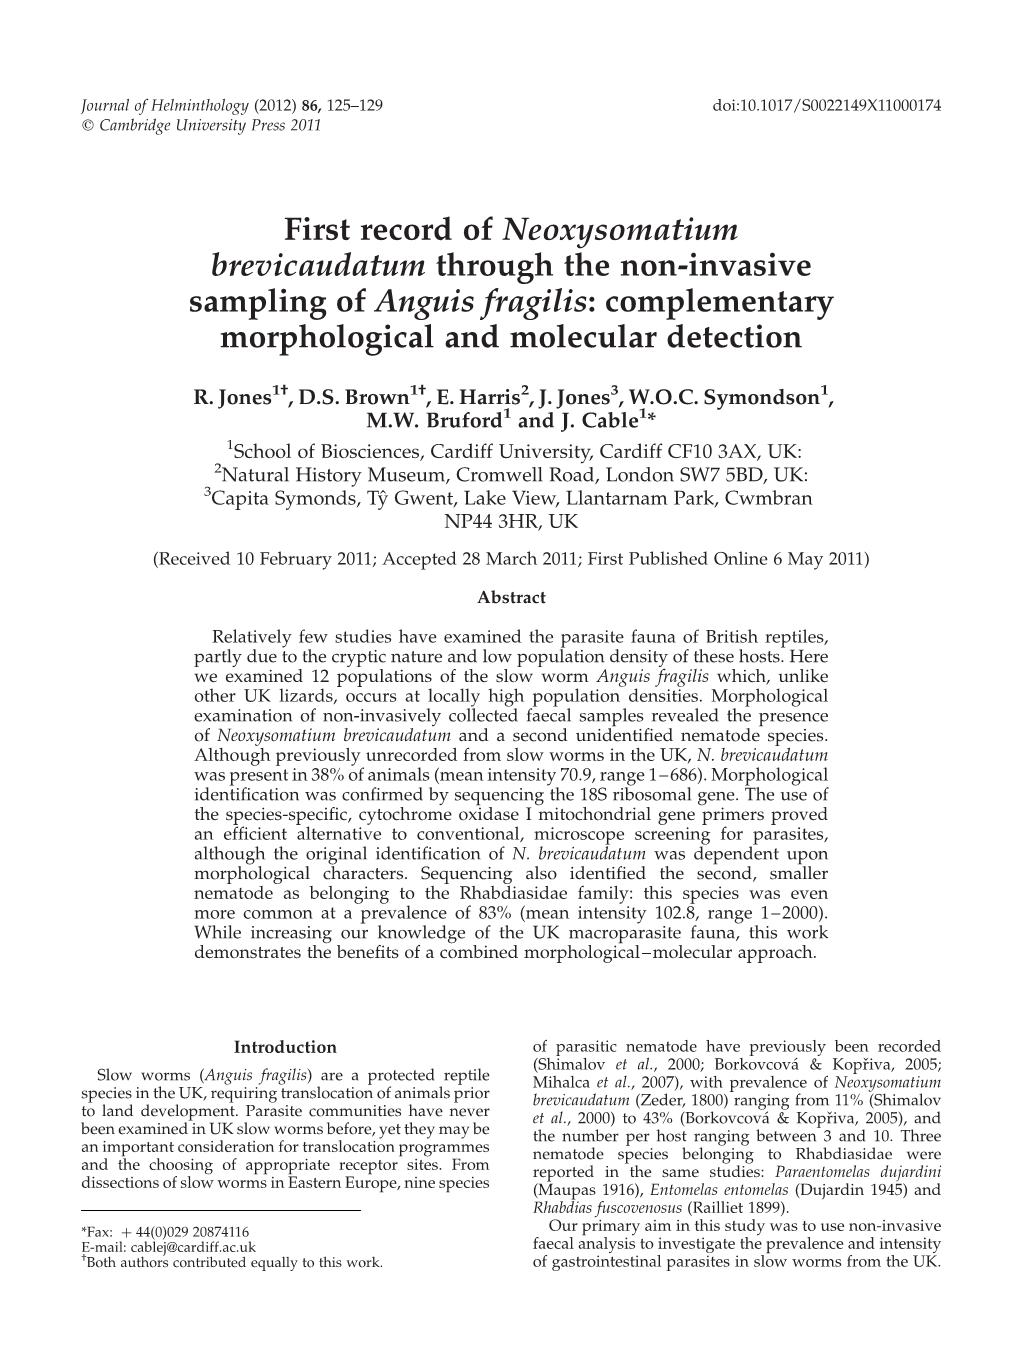 First Record of Neoxysomatium Brevicaudatum Through the Non-Invasive Sampling of Anguis Fragilis: Complementary Morphological and Molecular Detection